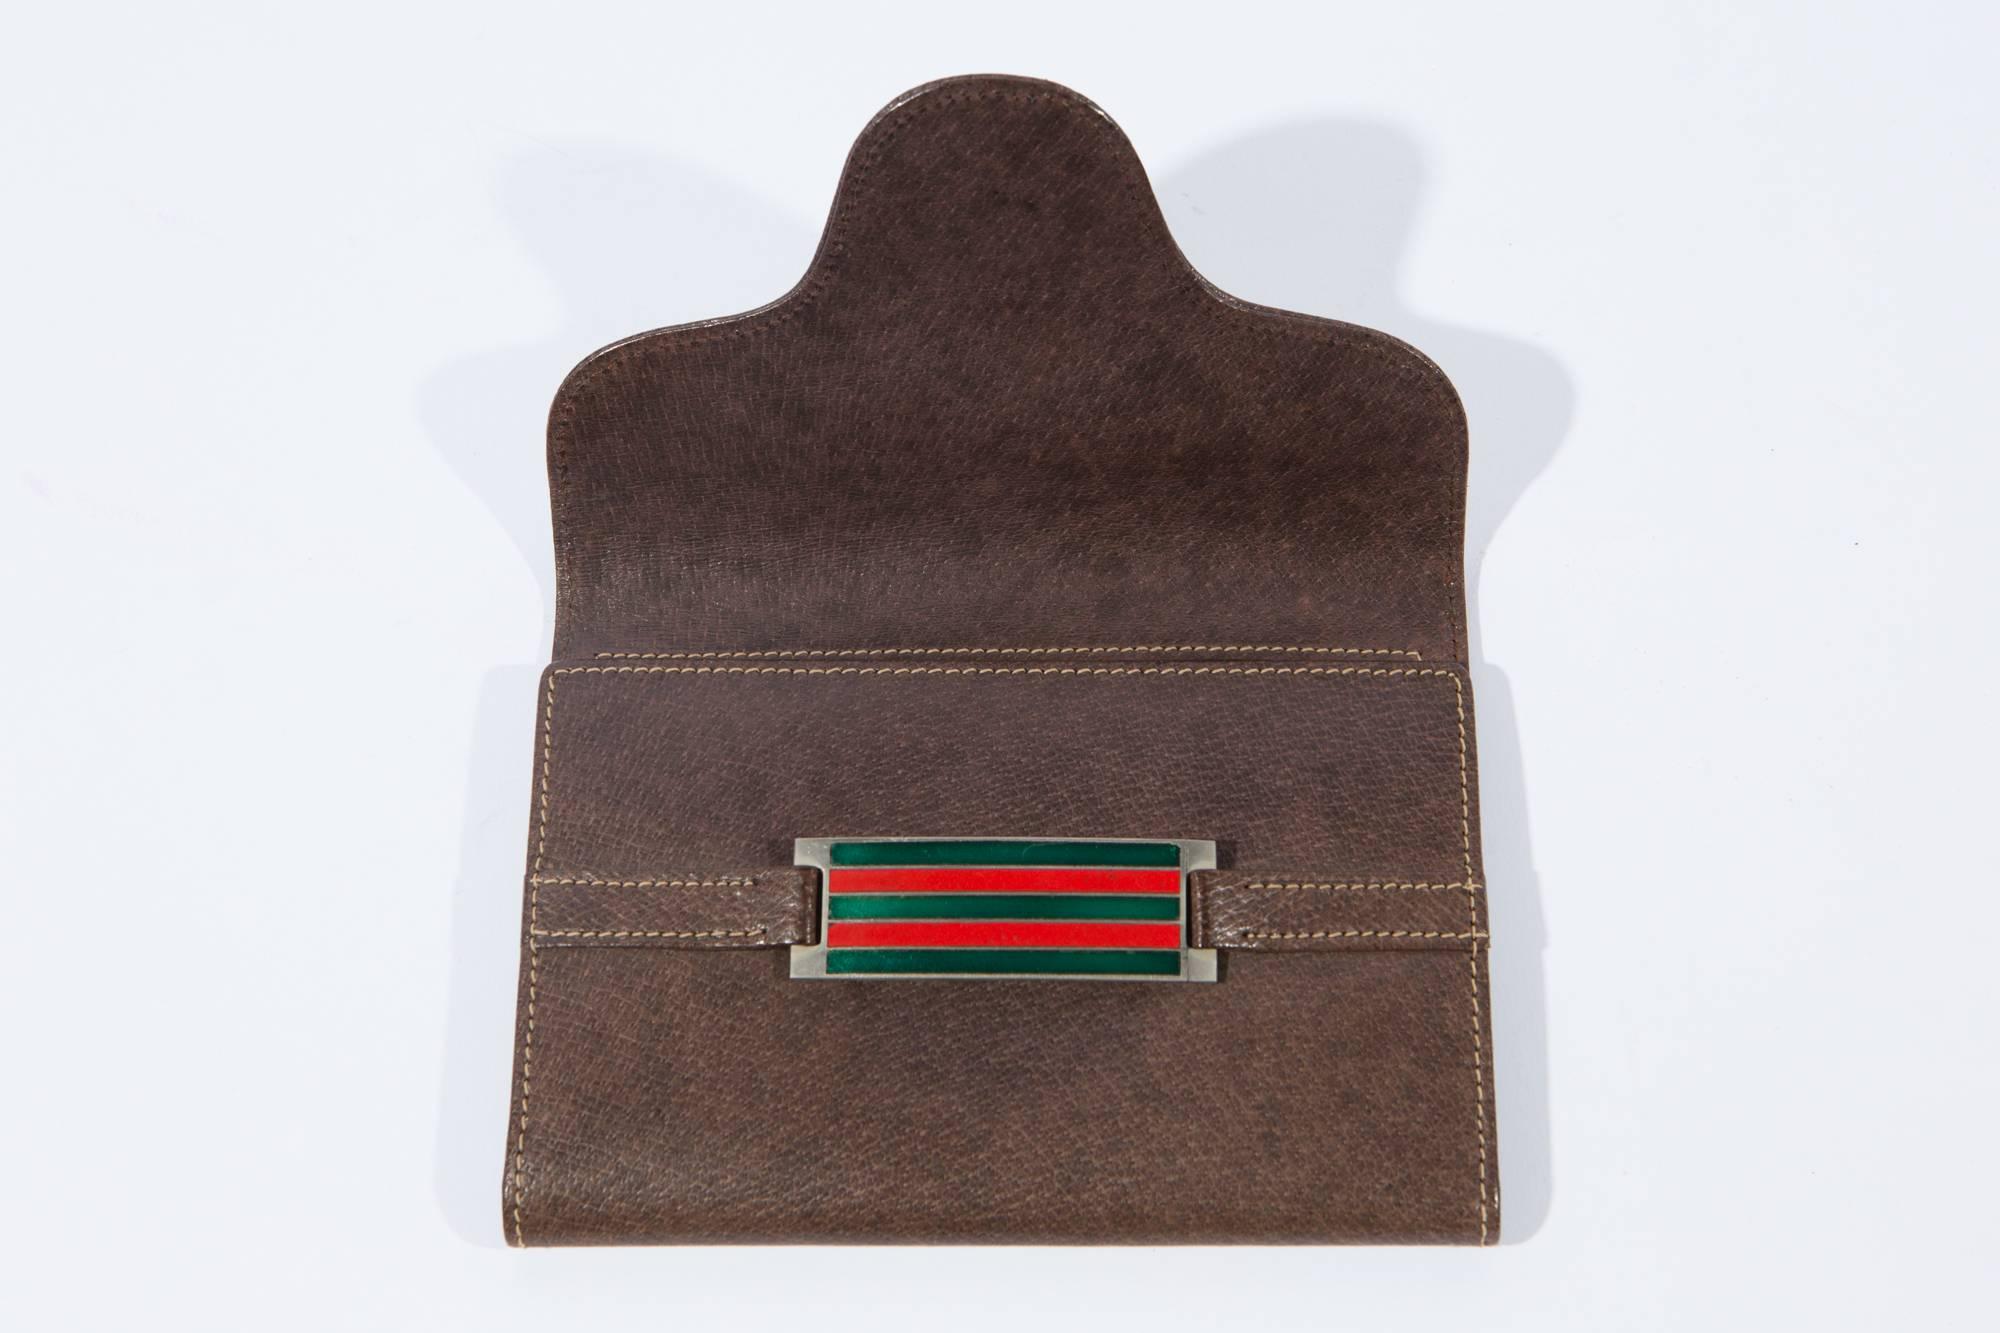 1970s Gucci  brown leather wallet featuring a front strap opening, inside  multiple interior compartments and an inside zipped pocket. Inside Gucci stamp. In excellent vintage condition. Made in Italy.
Closed 17cm x 12cm
Open 29cm x 17cm
